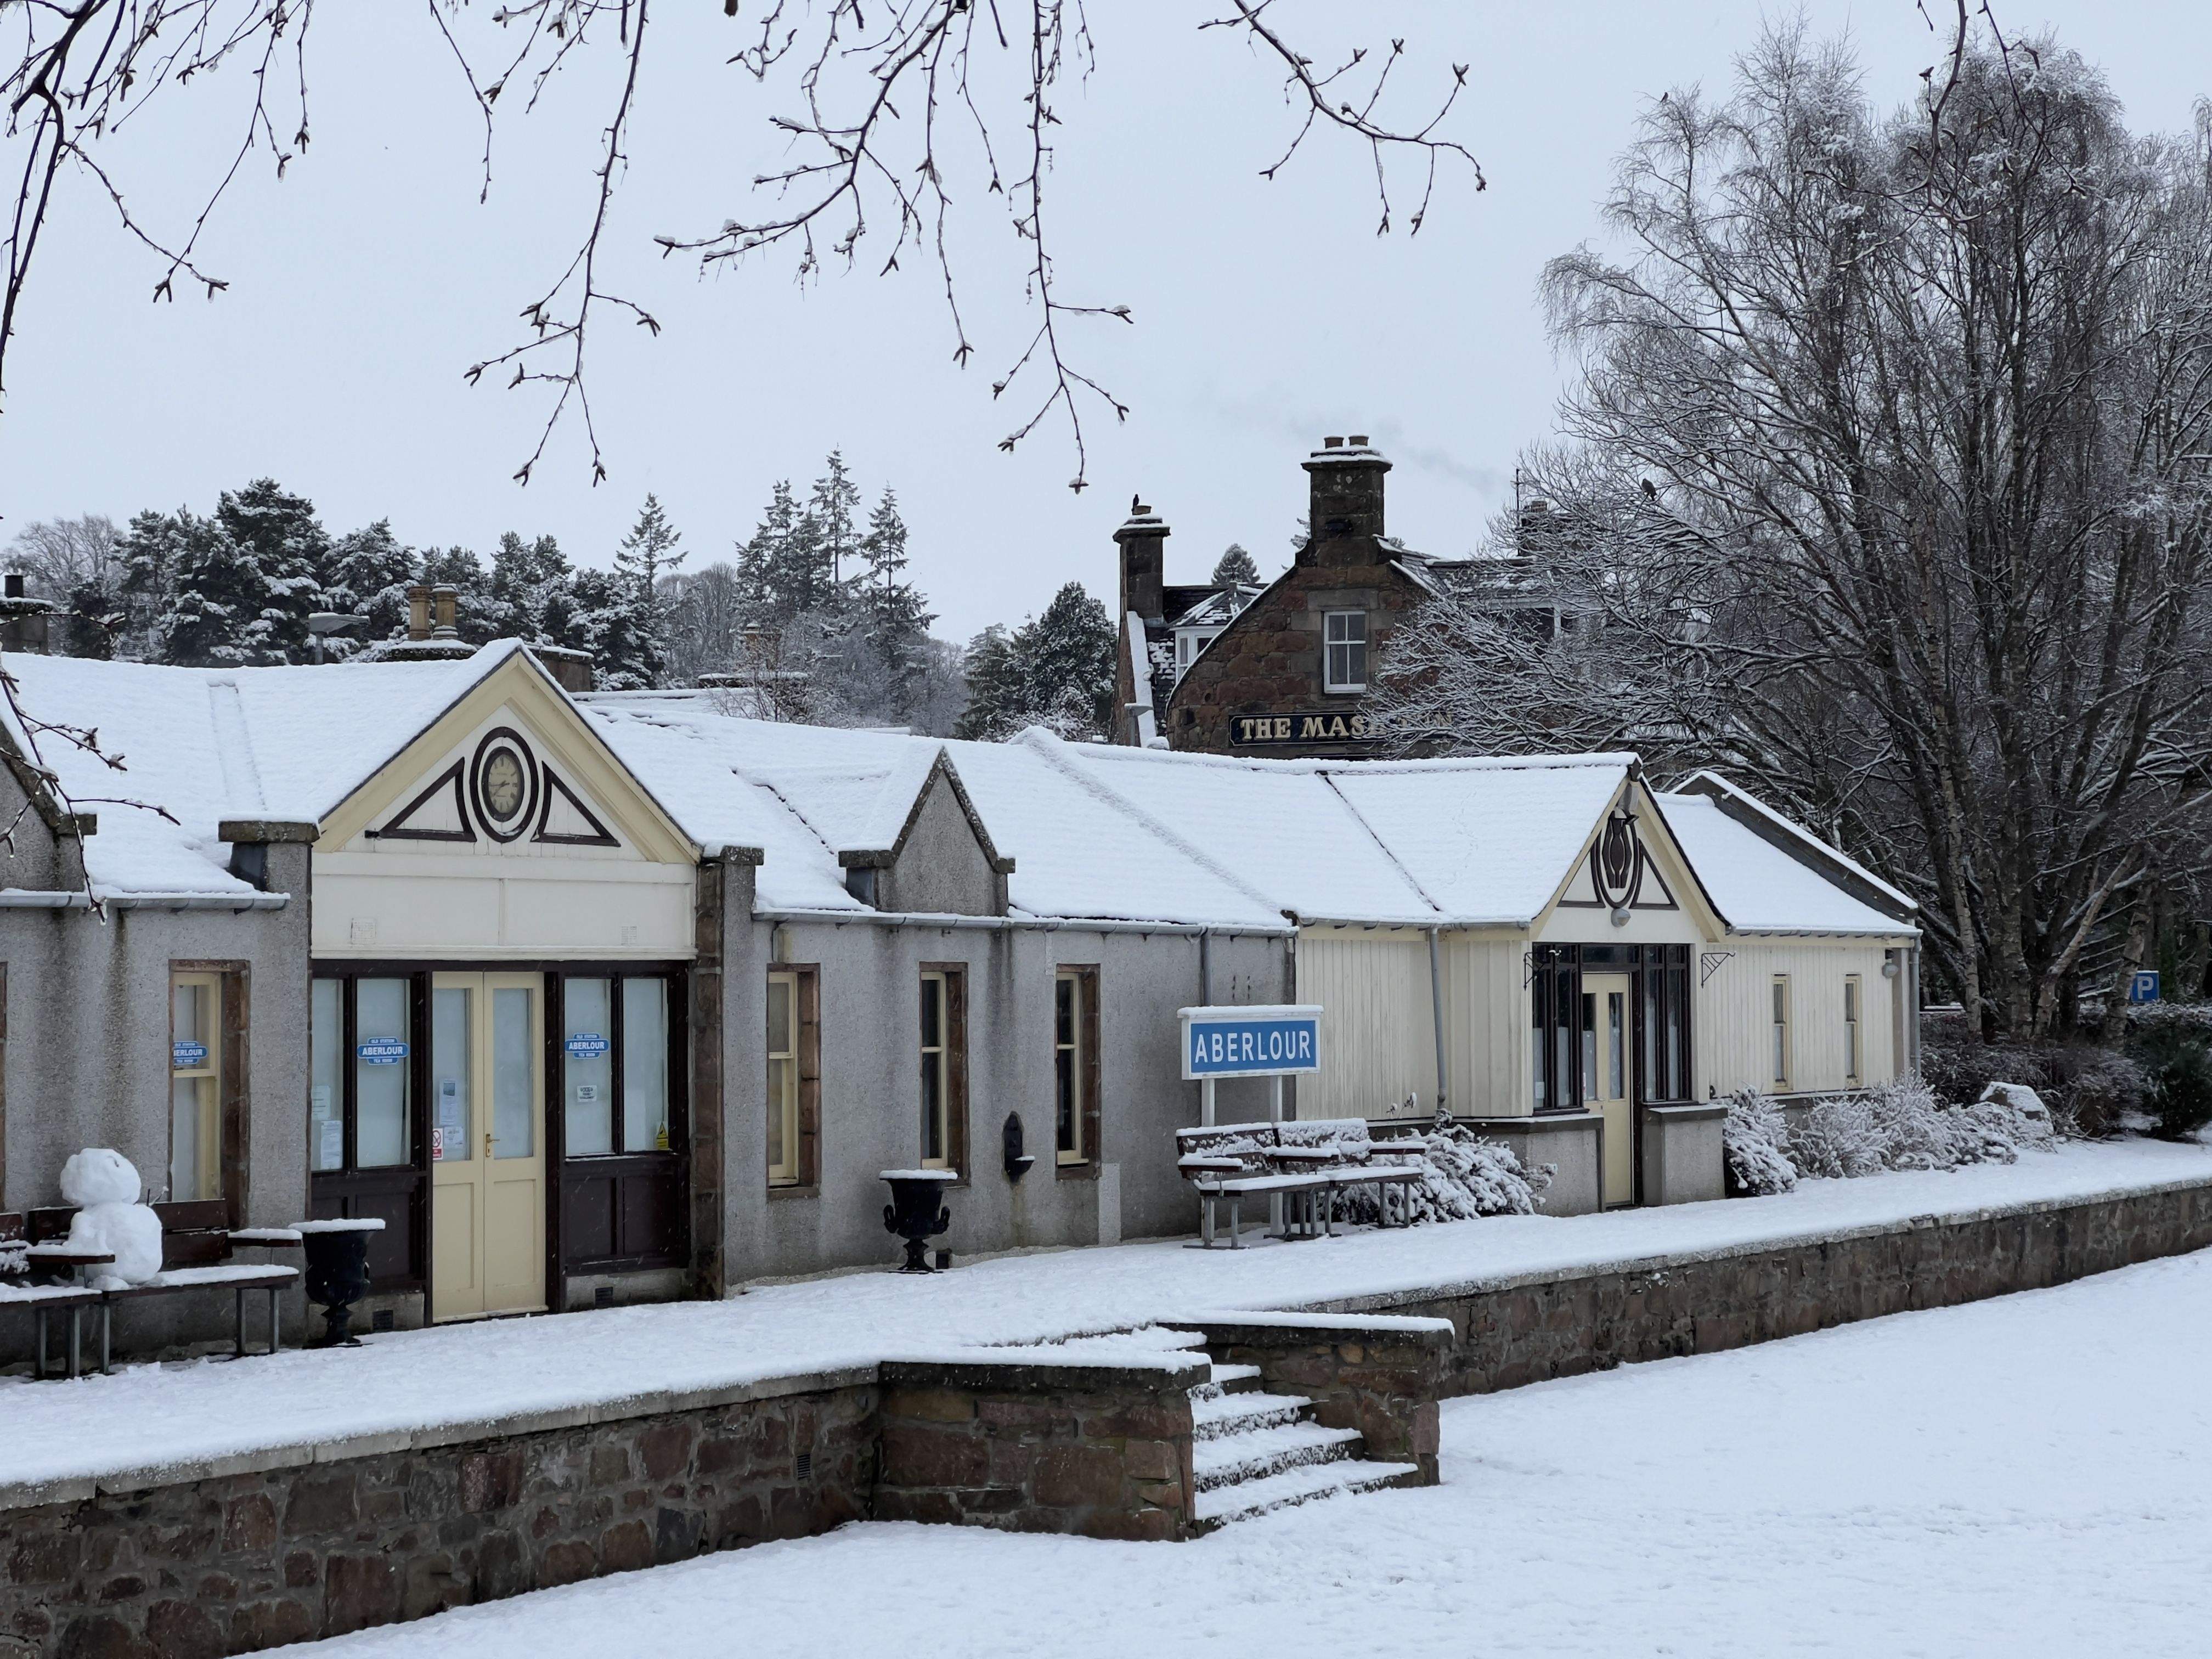 Aberlour covered in snow